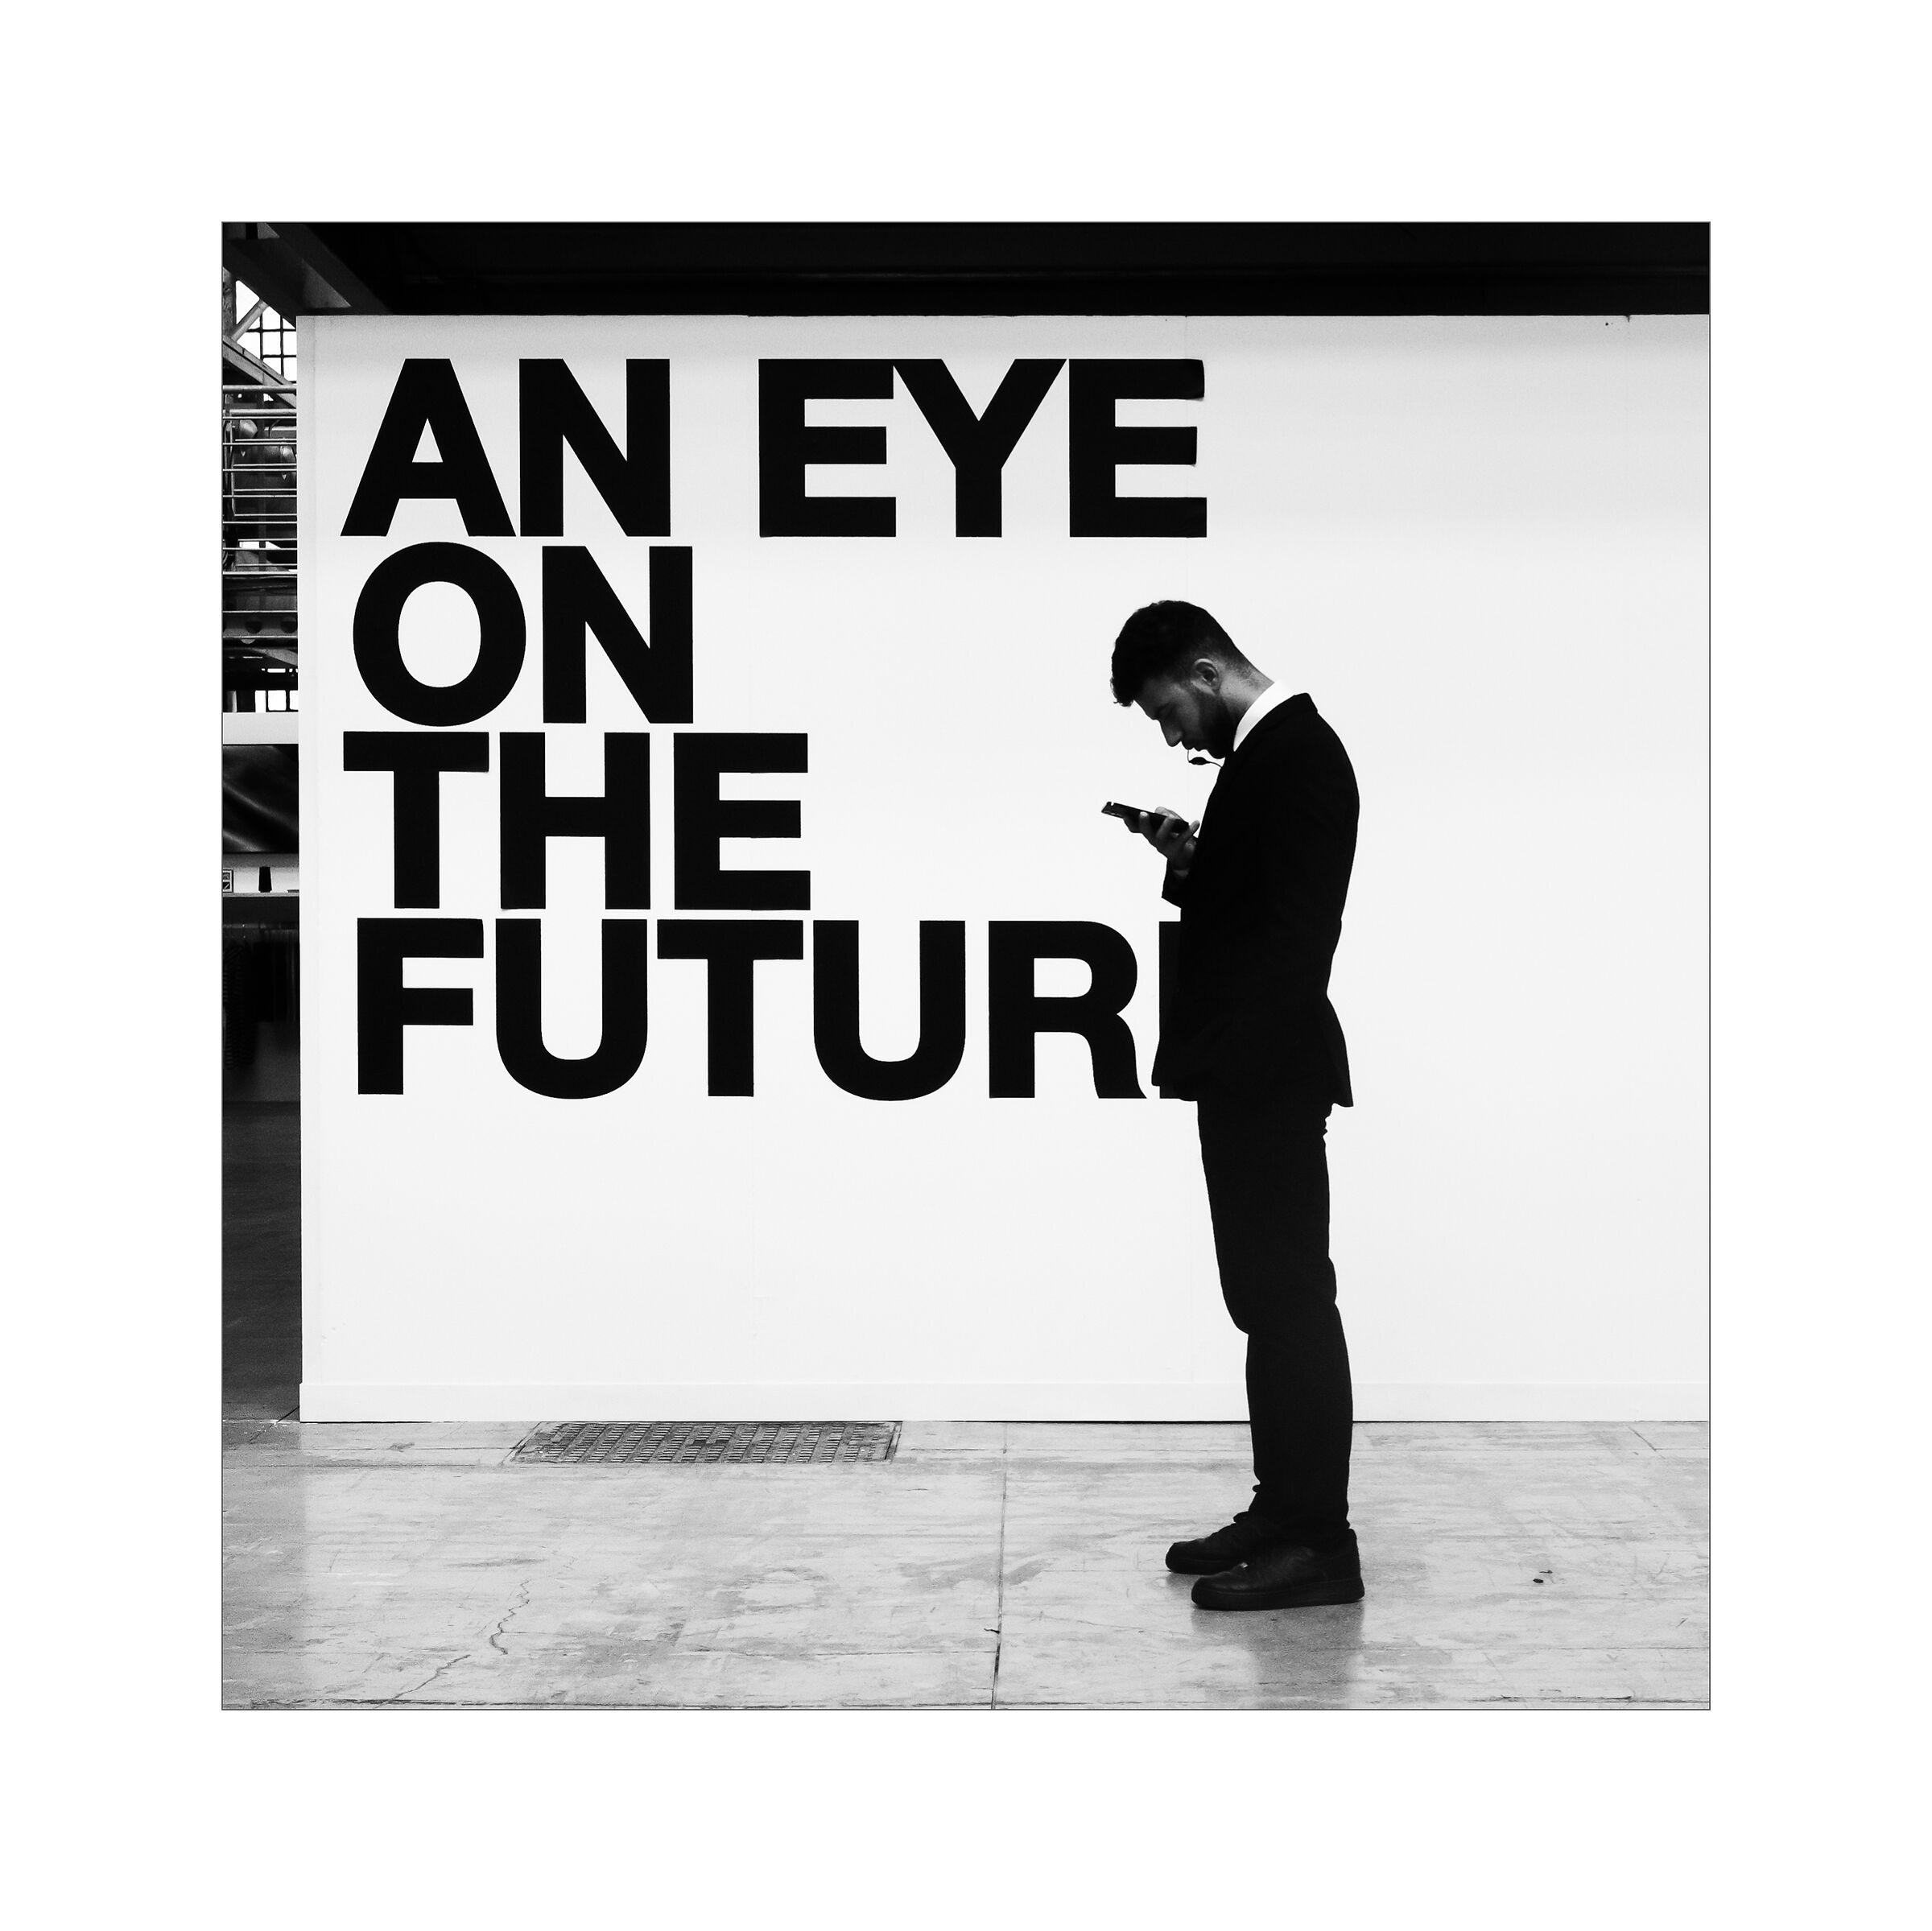 An eye to the future...